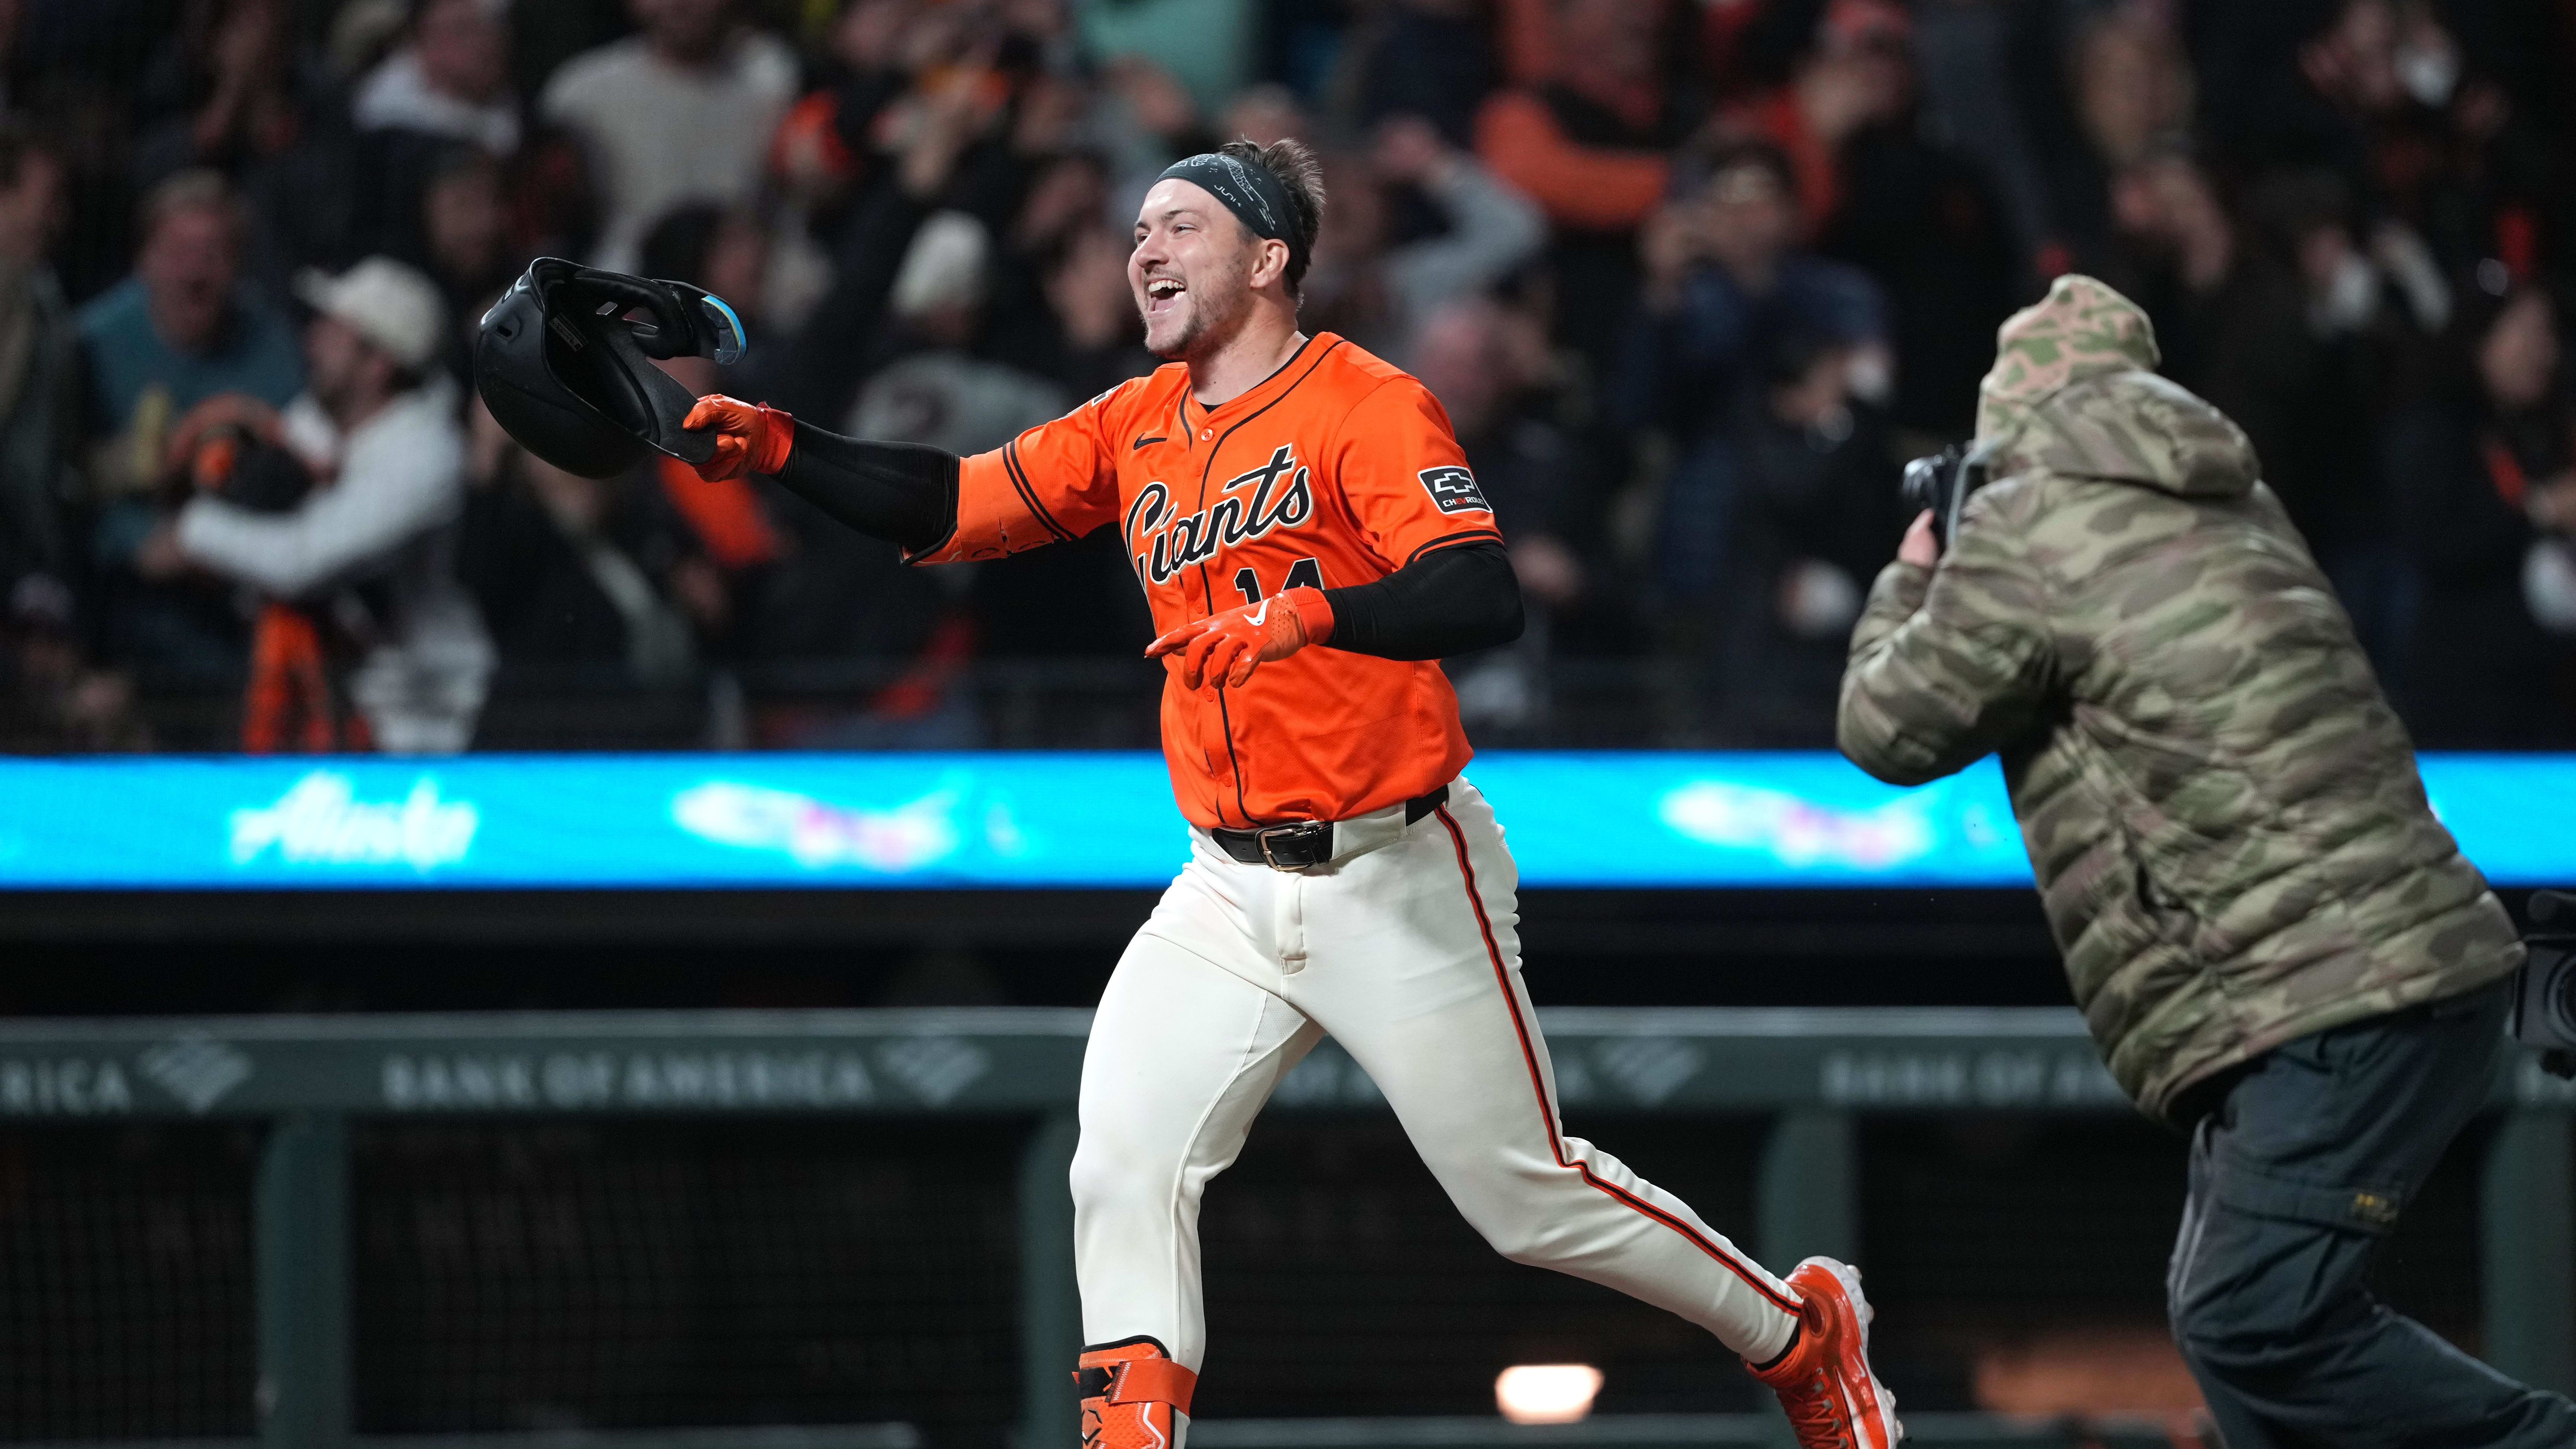 San Francisco Giants Triumph as Patrick Bailey Makes History with Walk-Off Homer